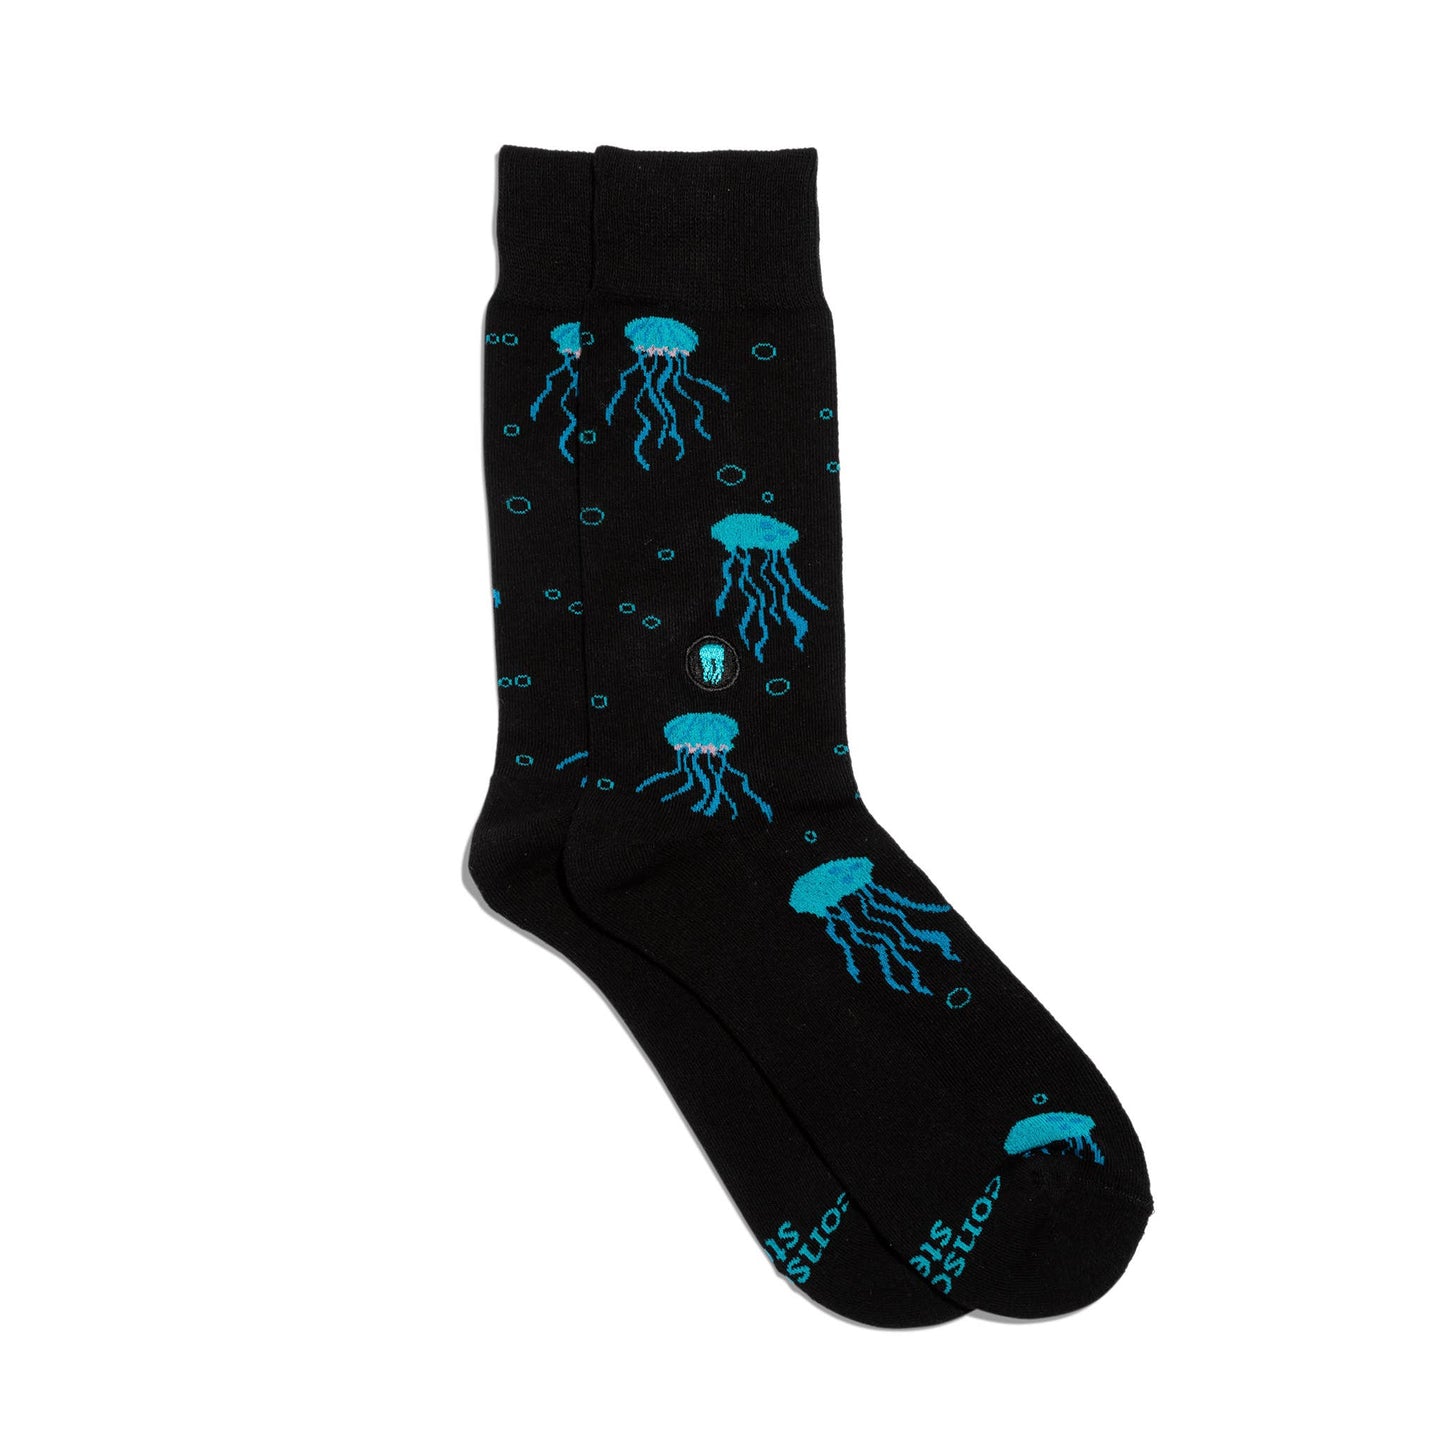 Conscious Step - Socks that Protect Oceans (Black Jellyfish)  Conscious Step   -better made easy-eco-friendly-sustainable-gifting